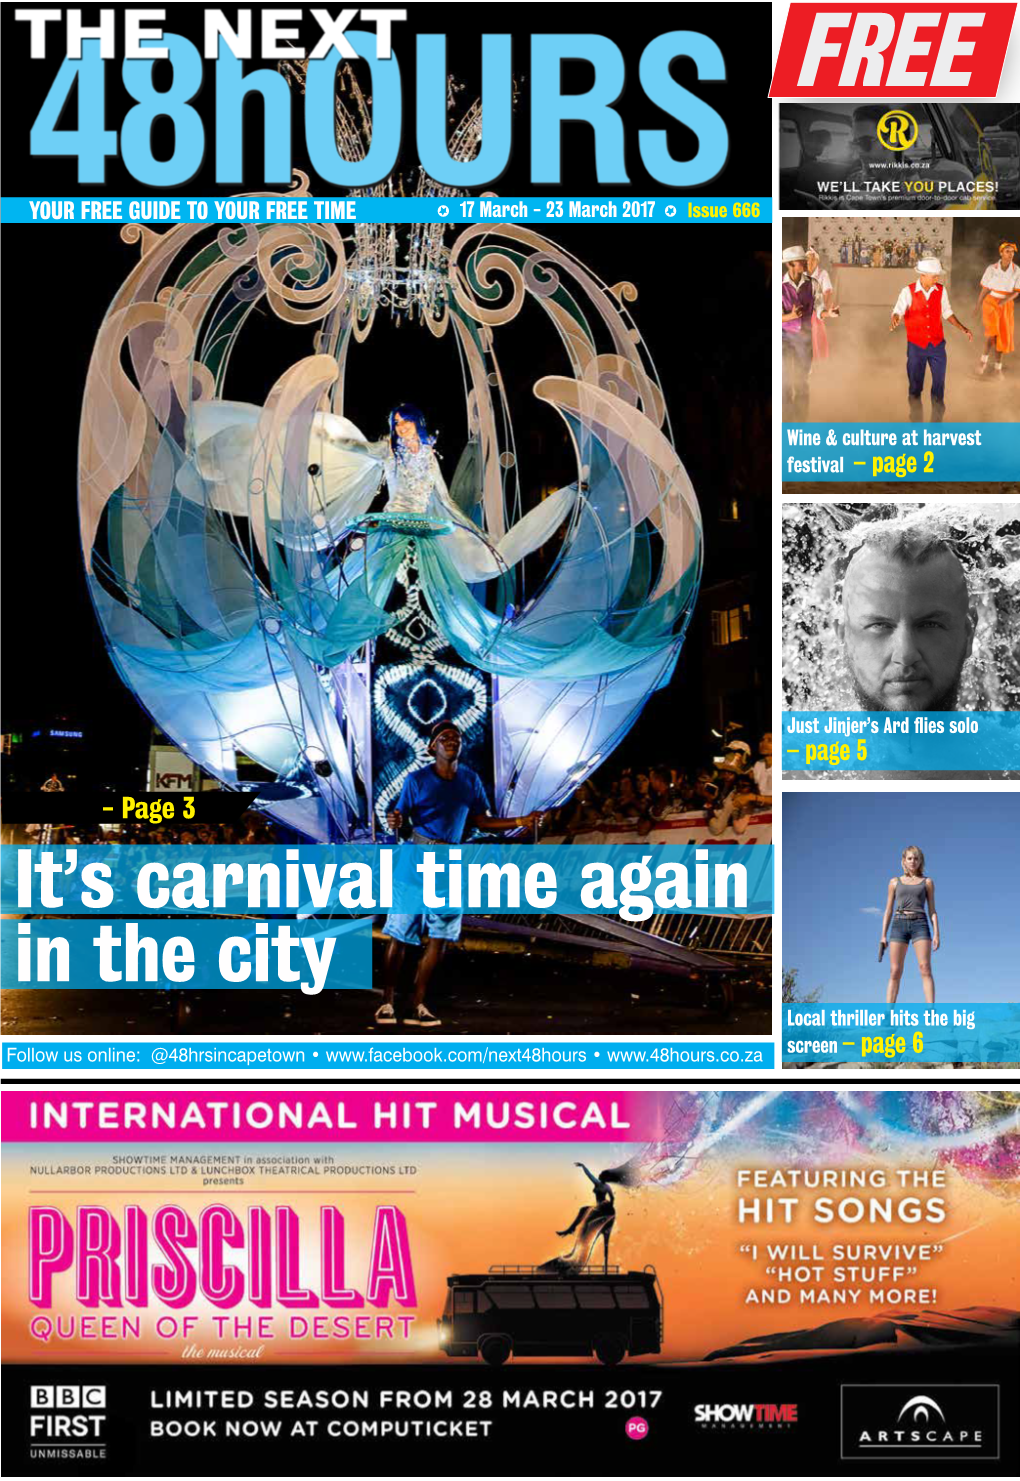 It's Carnival Time Again in the City